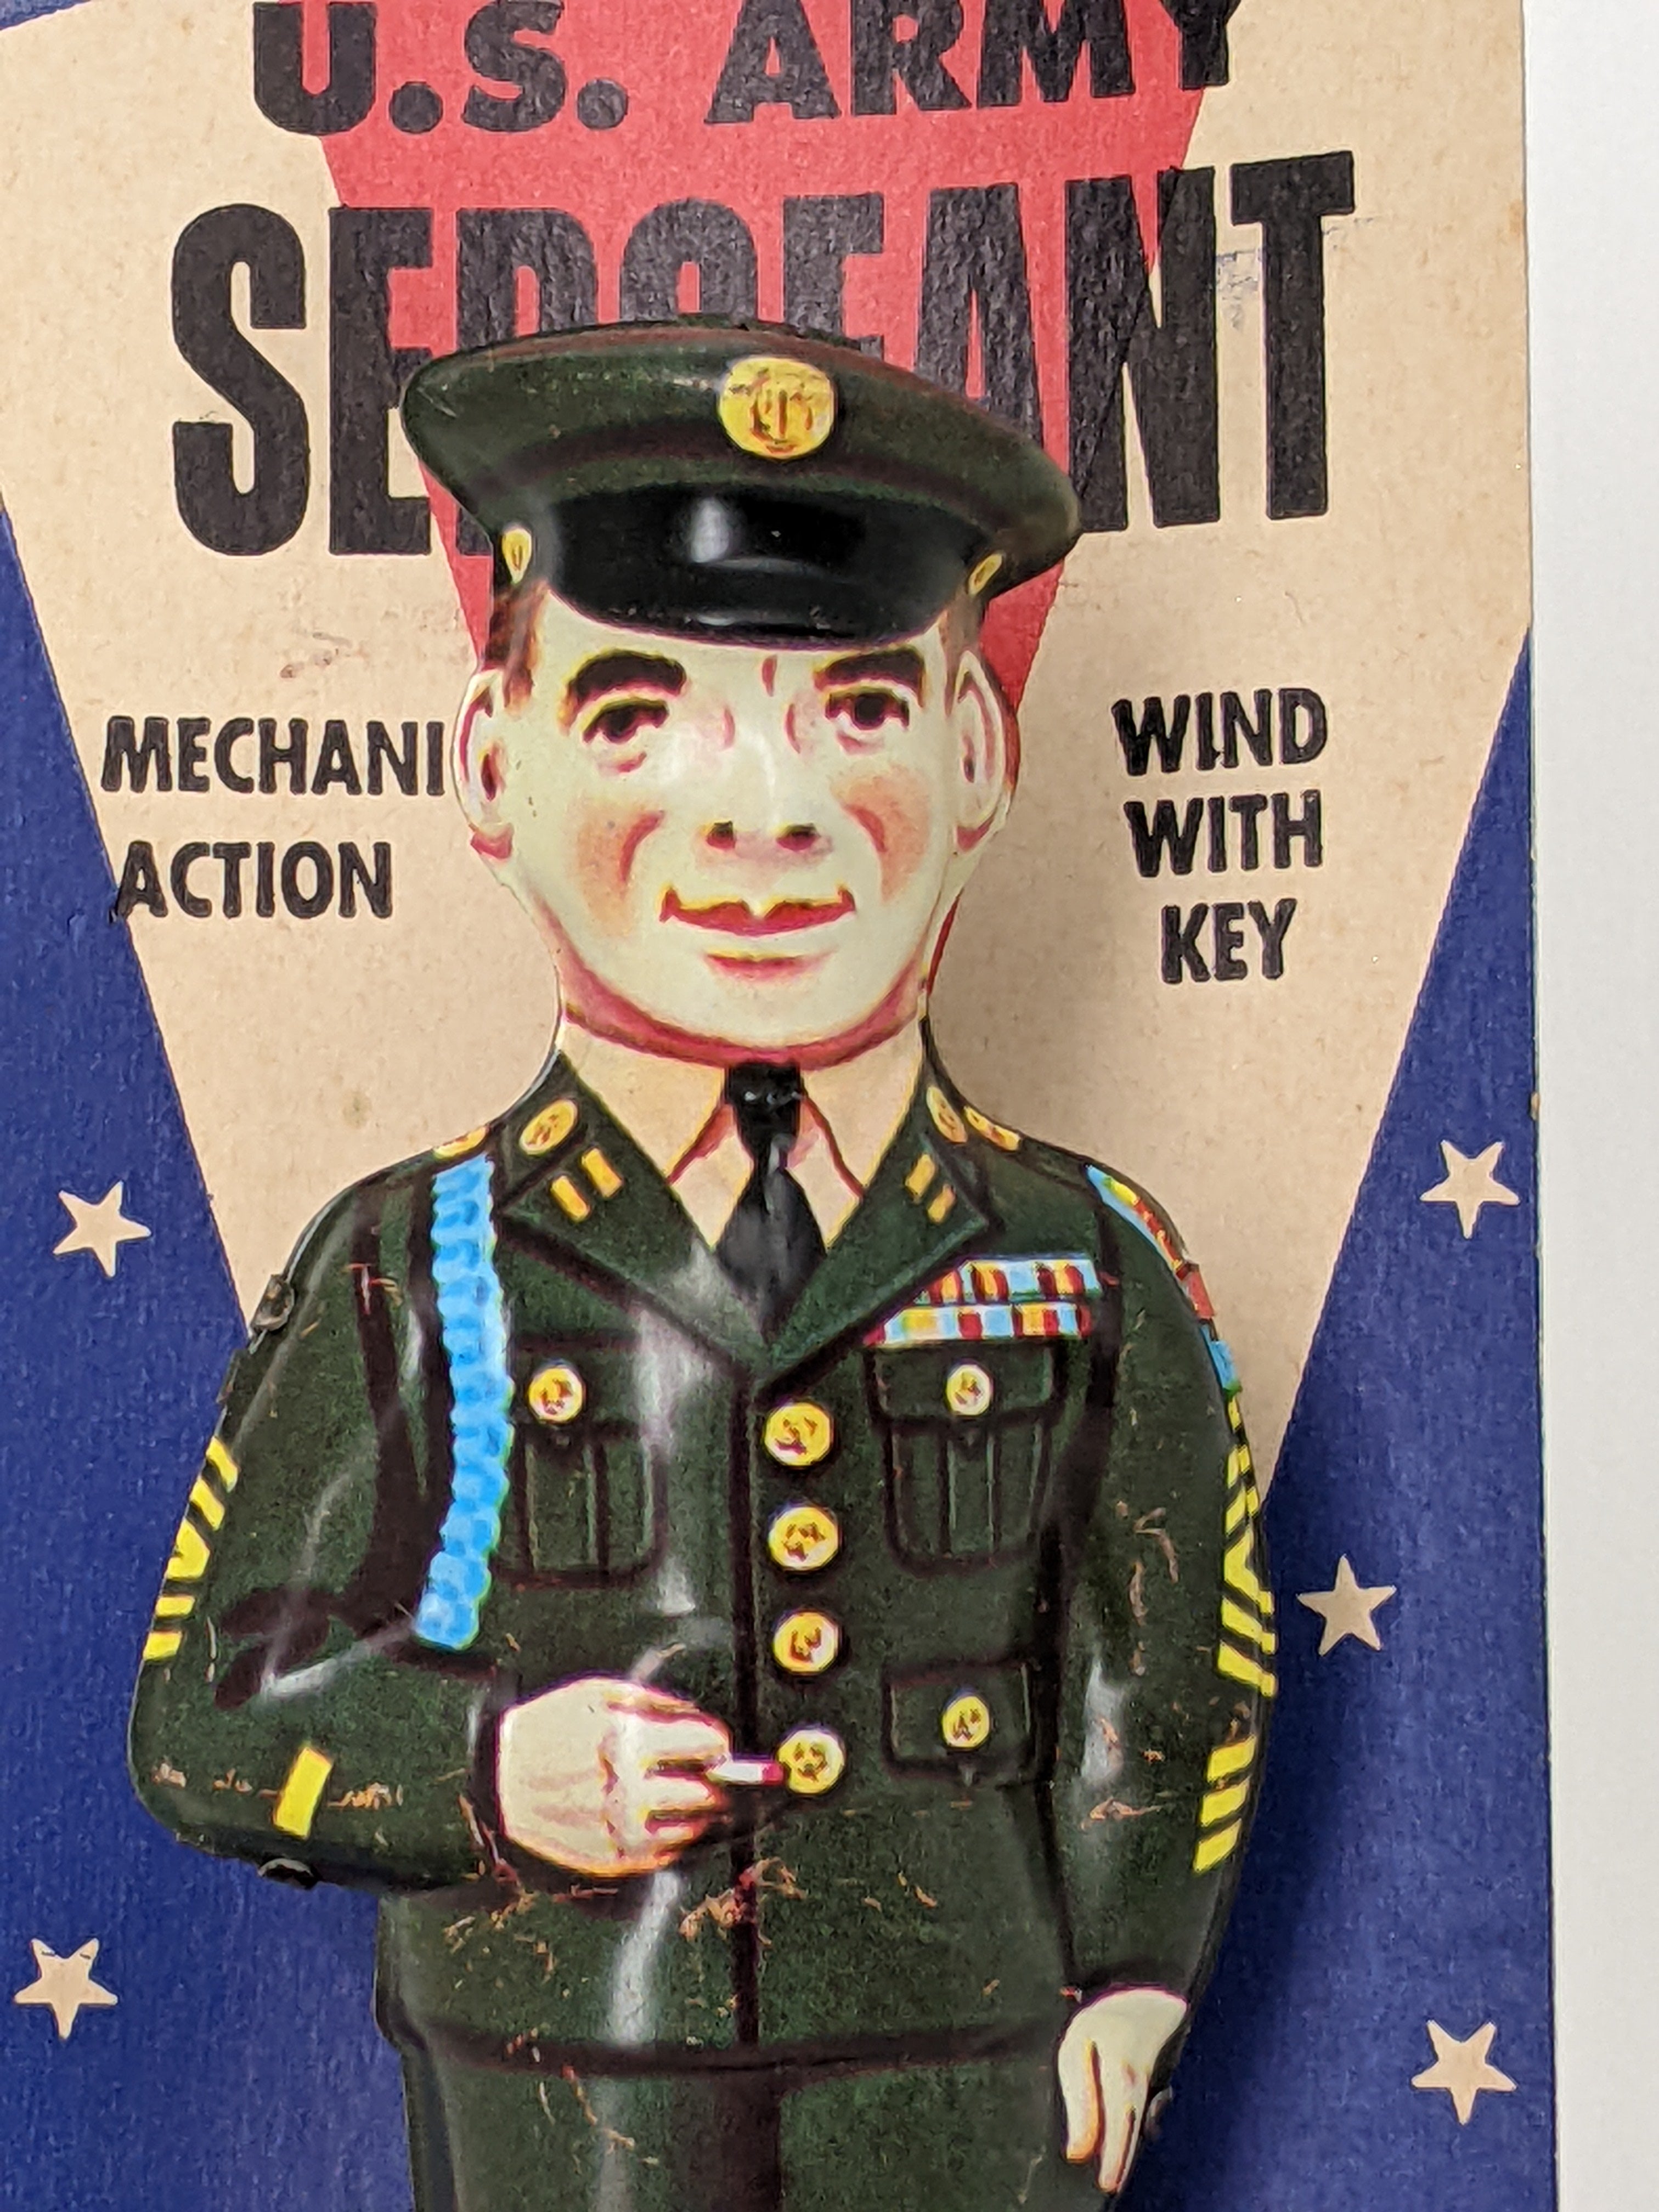 J. Chein Walking U.S. Army Sergeant Tin Wind-up Toy with Packaging